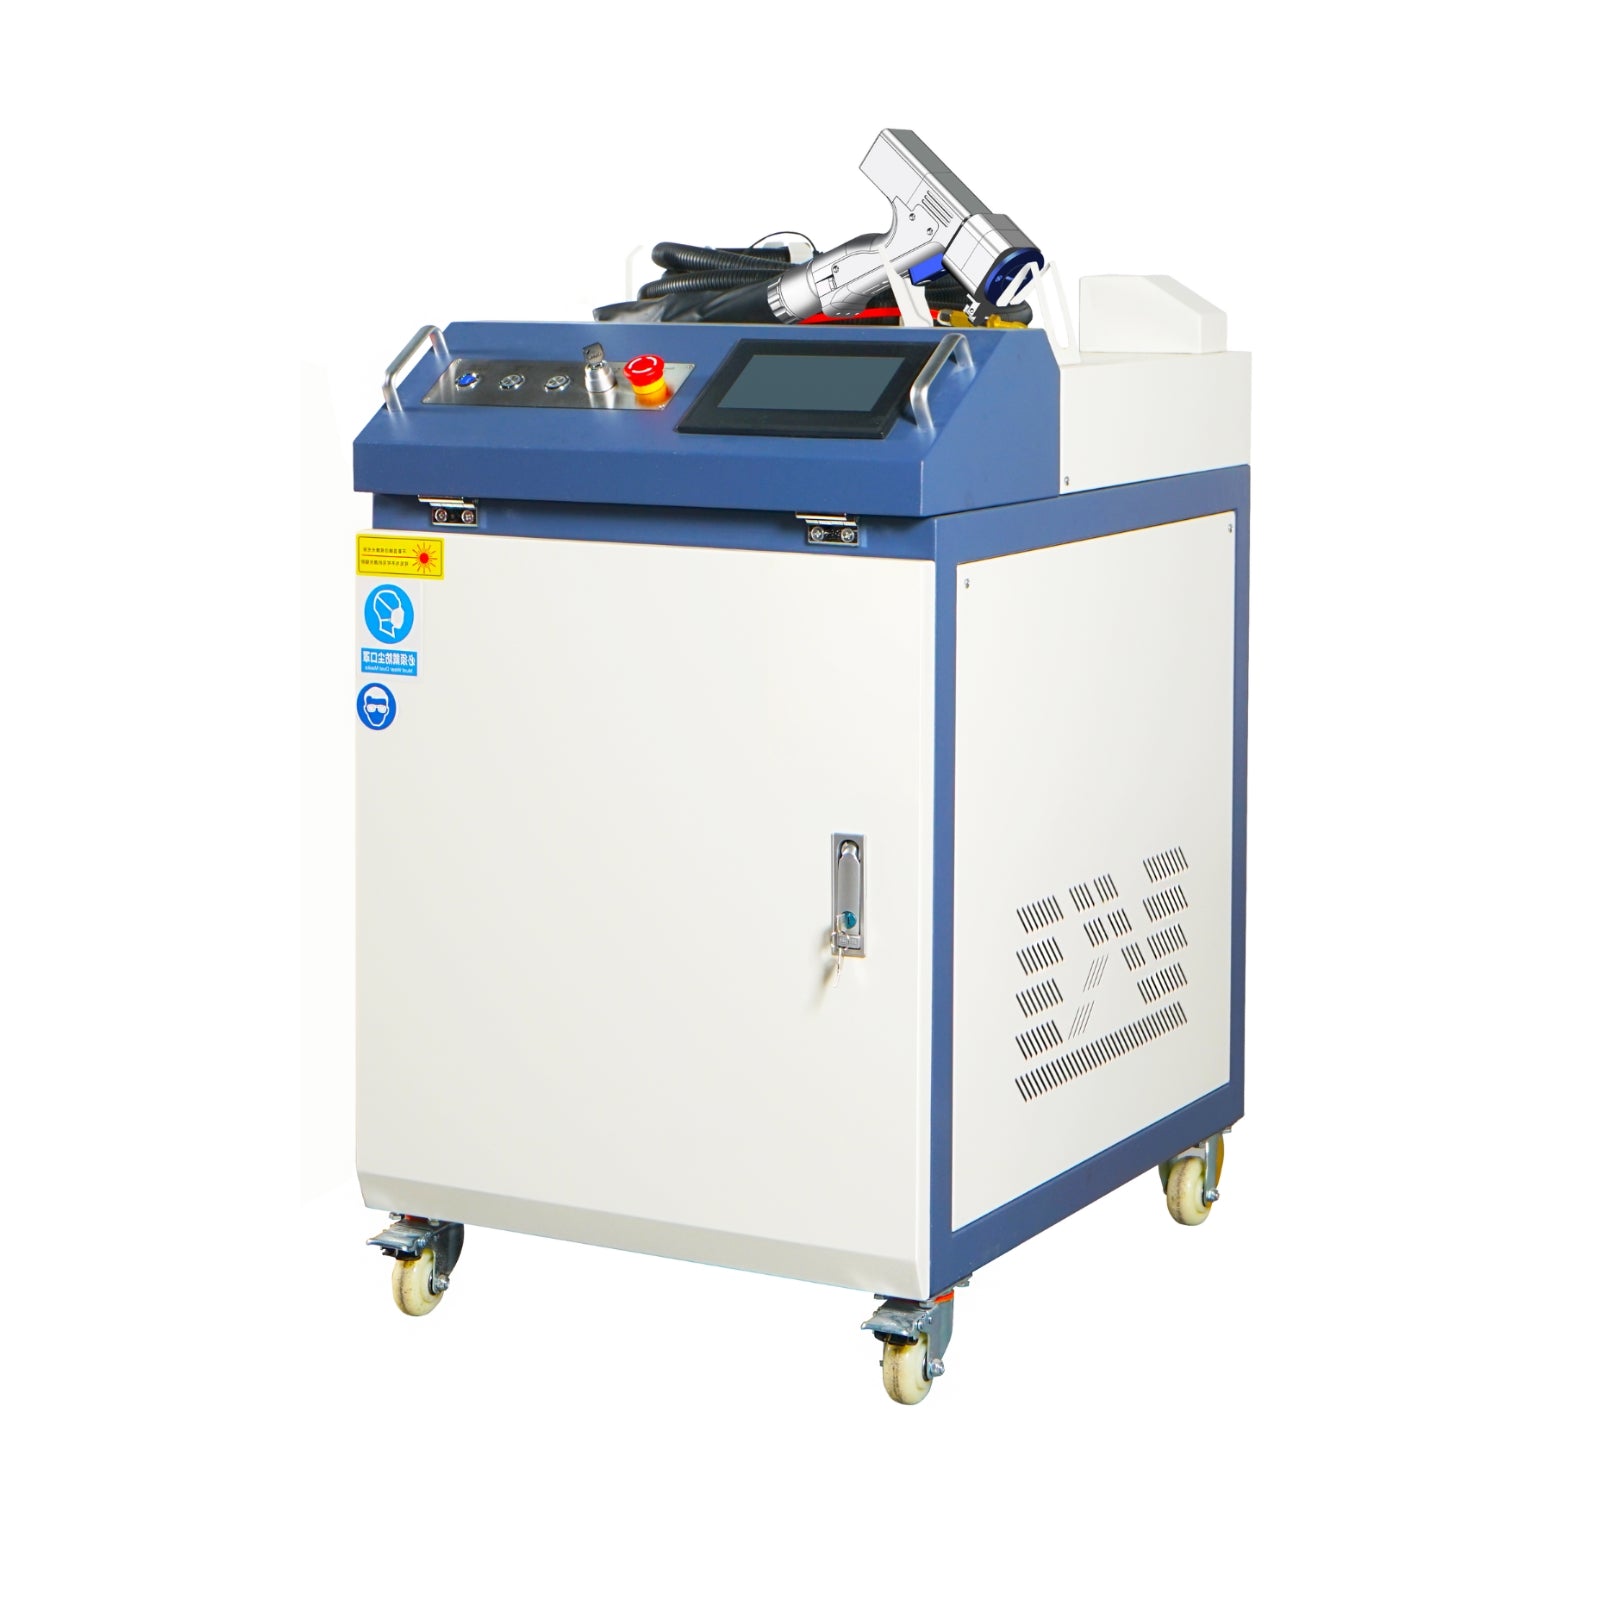 1000W/1500W/2000W Fiber Laser Cleaner for Metal Rust Removal Paint Oil and Coating Cleaning